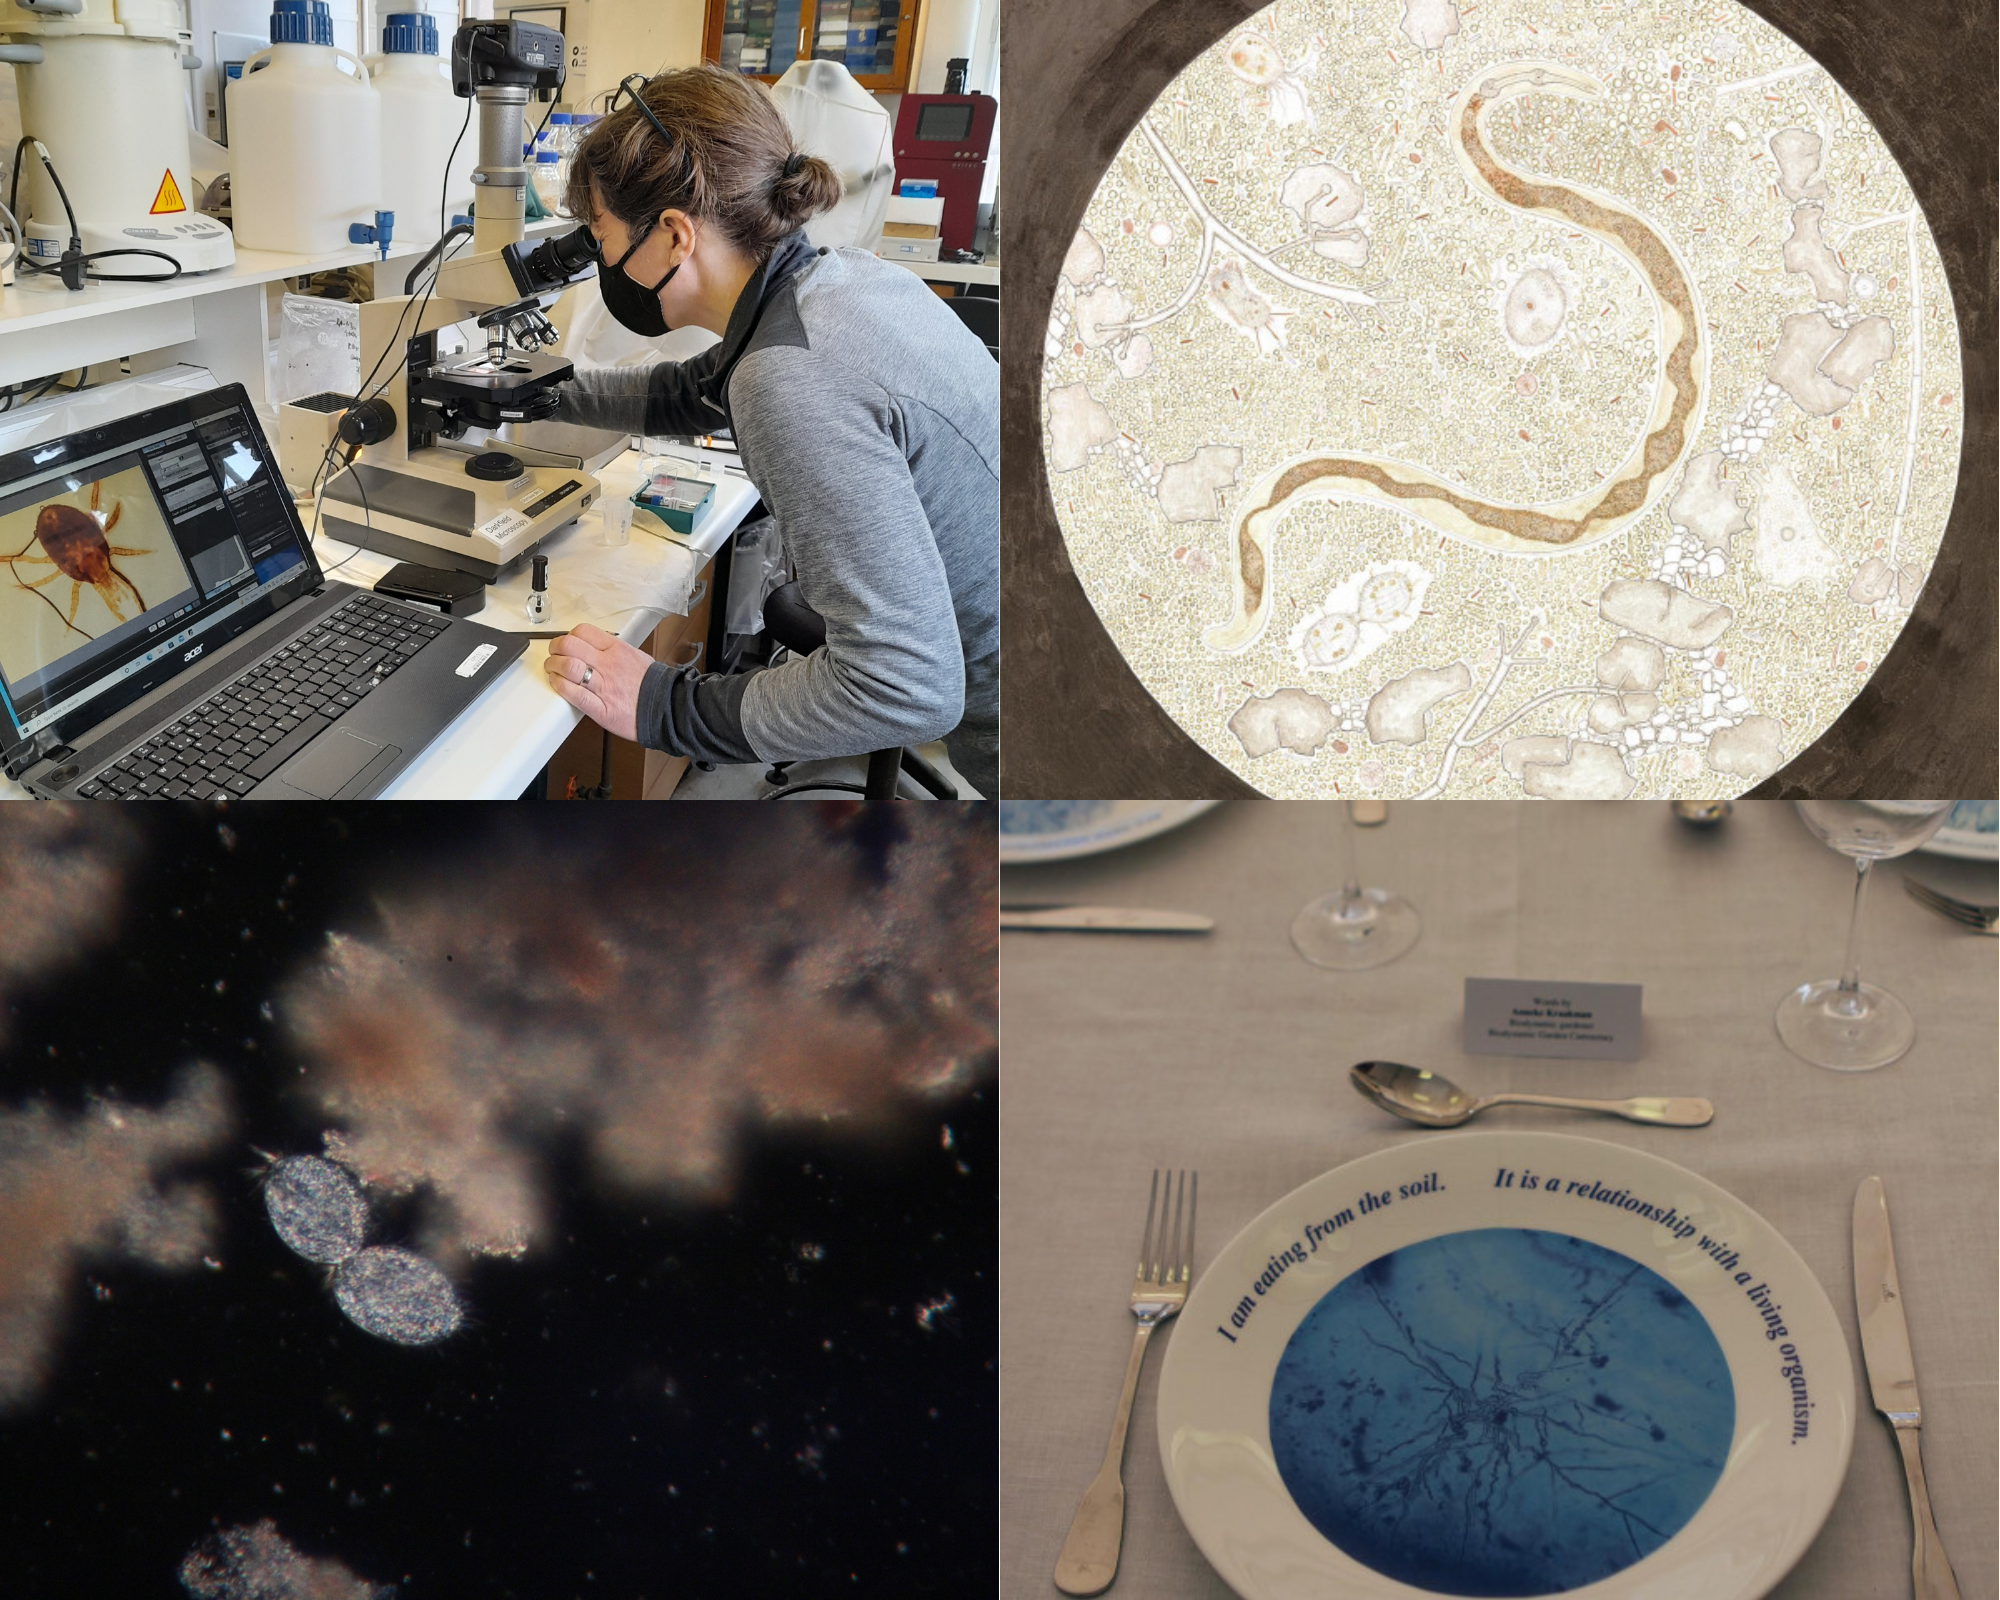 Natalie Taylor – Using microscopy to make soil microorganisms visible. Artwork and images by Natalie Taylor.